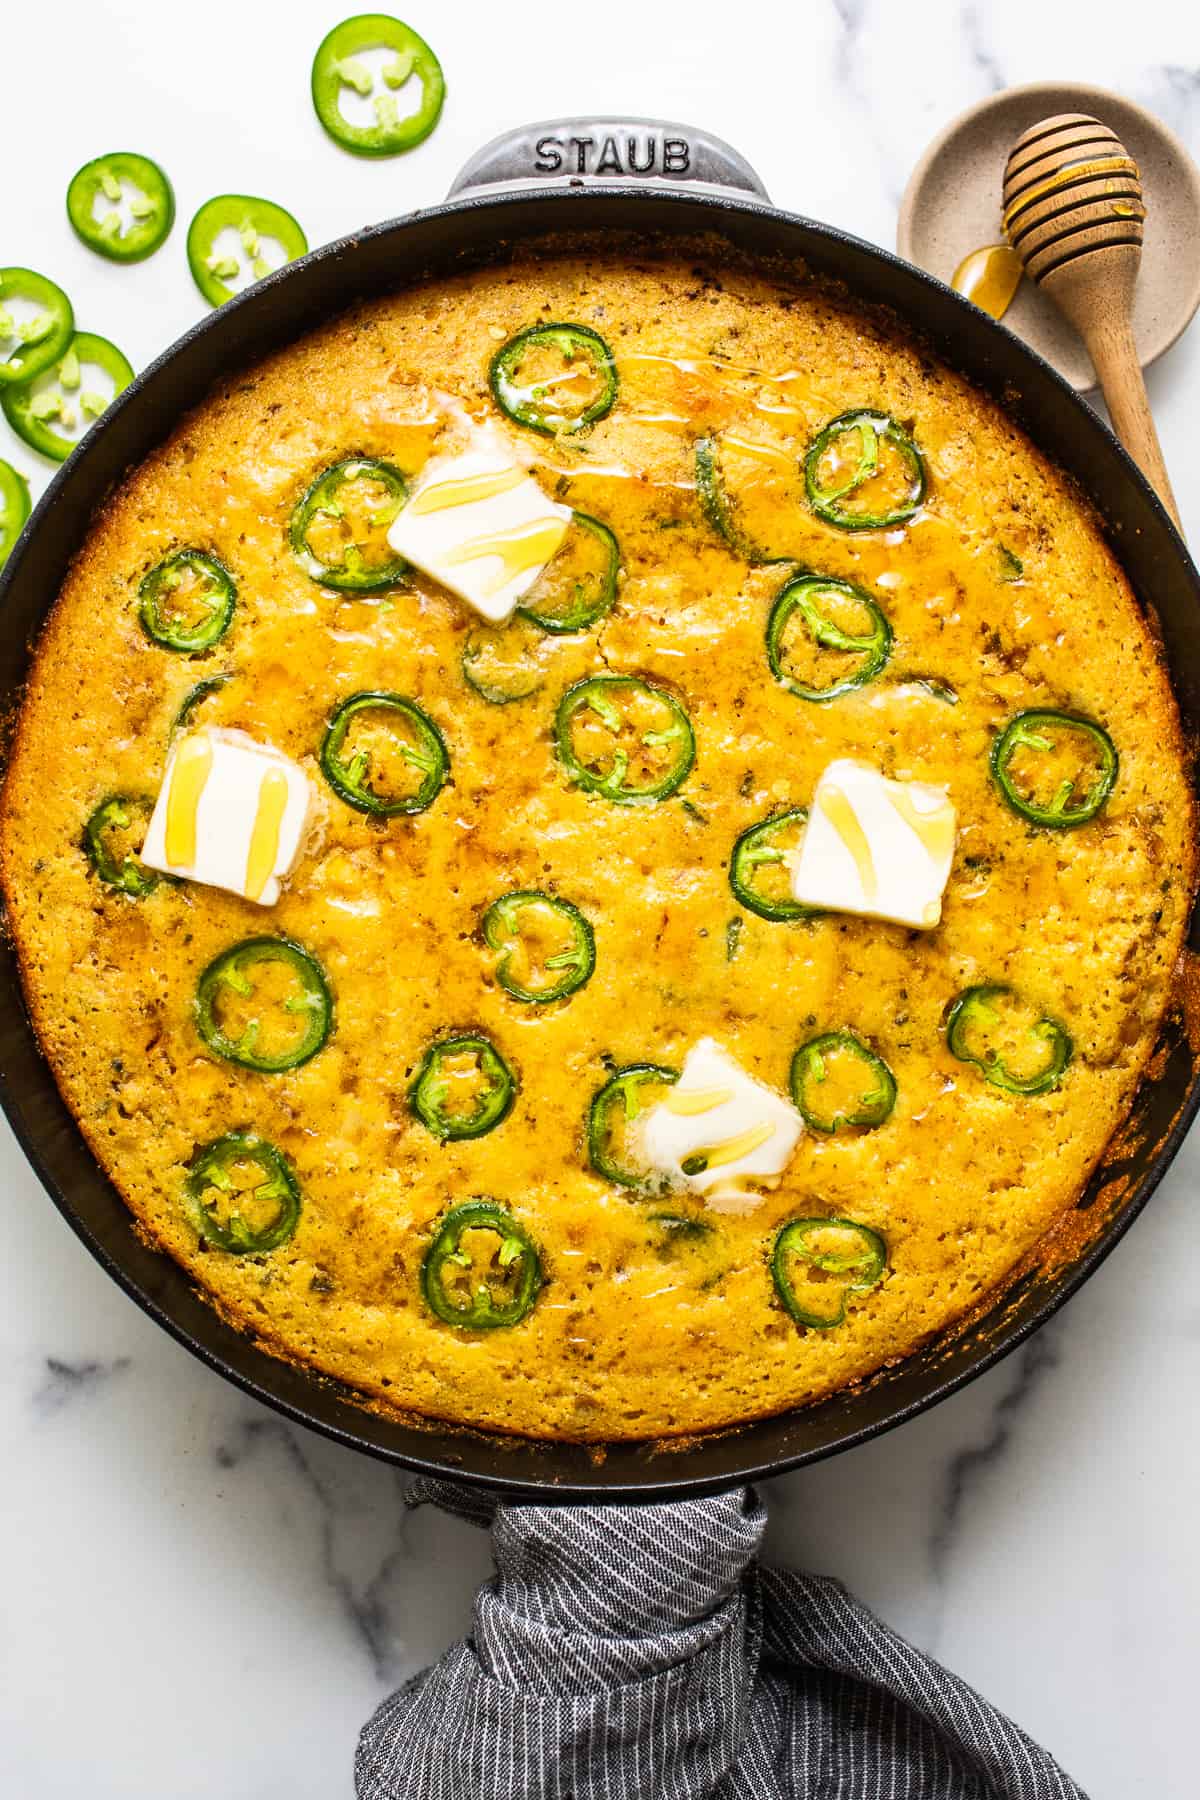 Jalapeno corn pudding in a cast iron skillet topped with pads of butter.